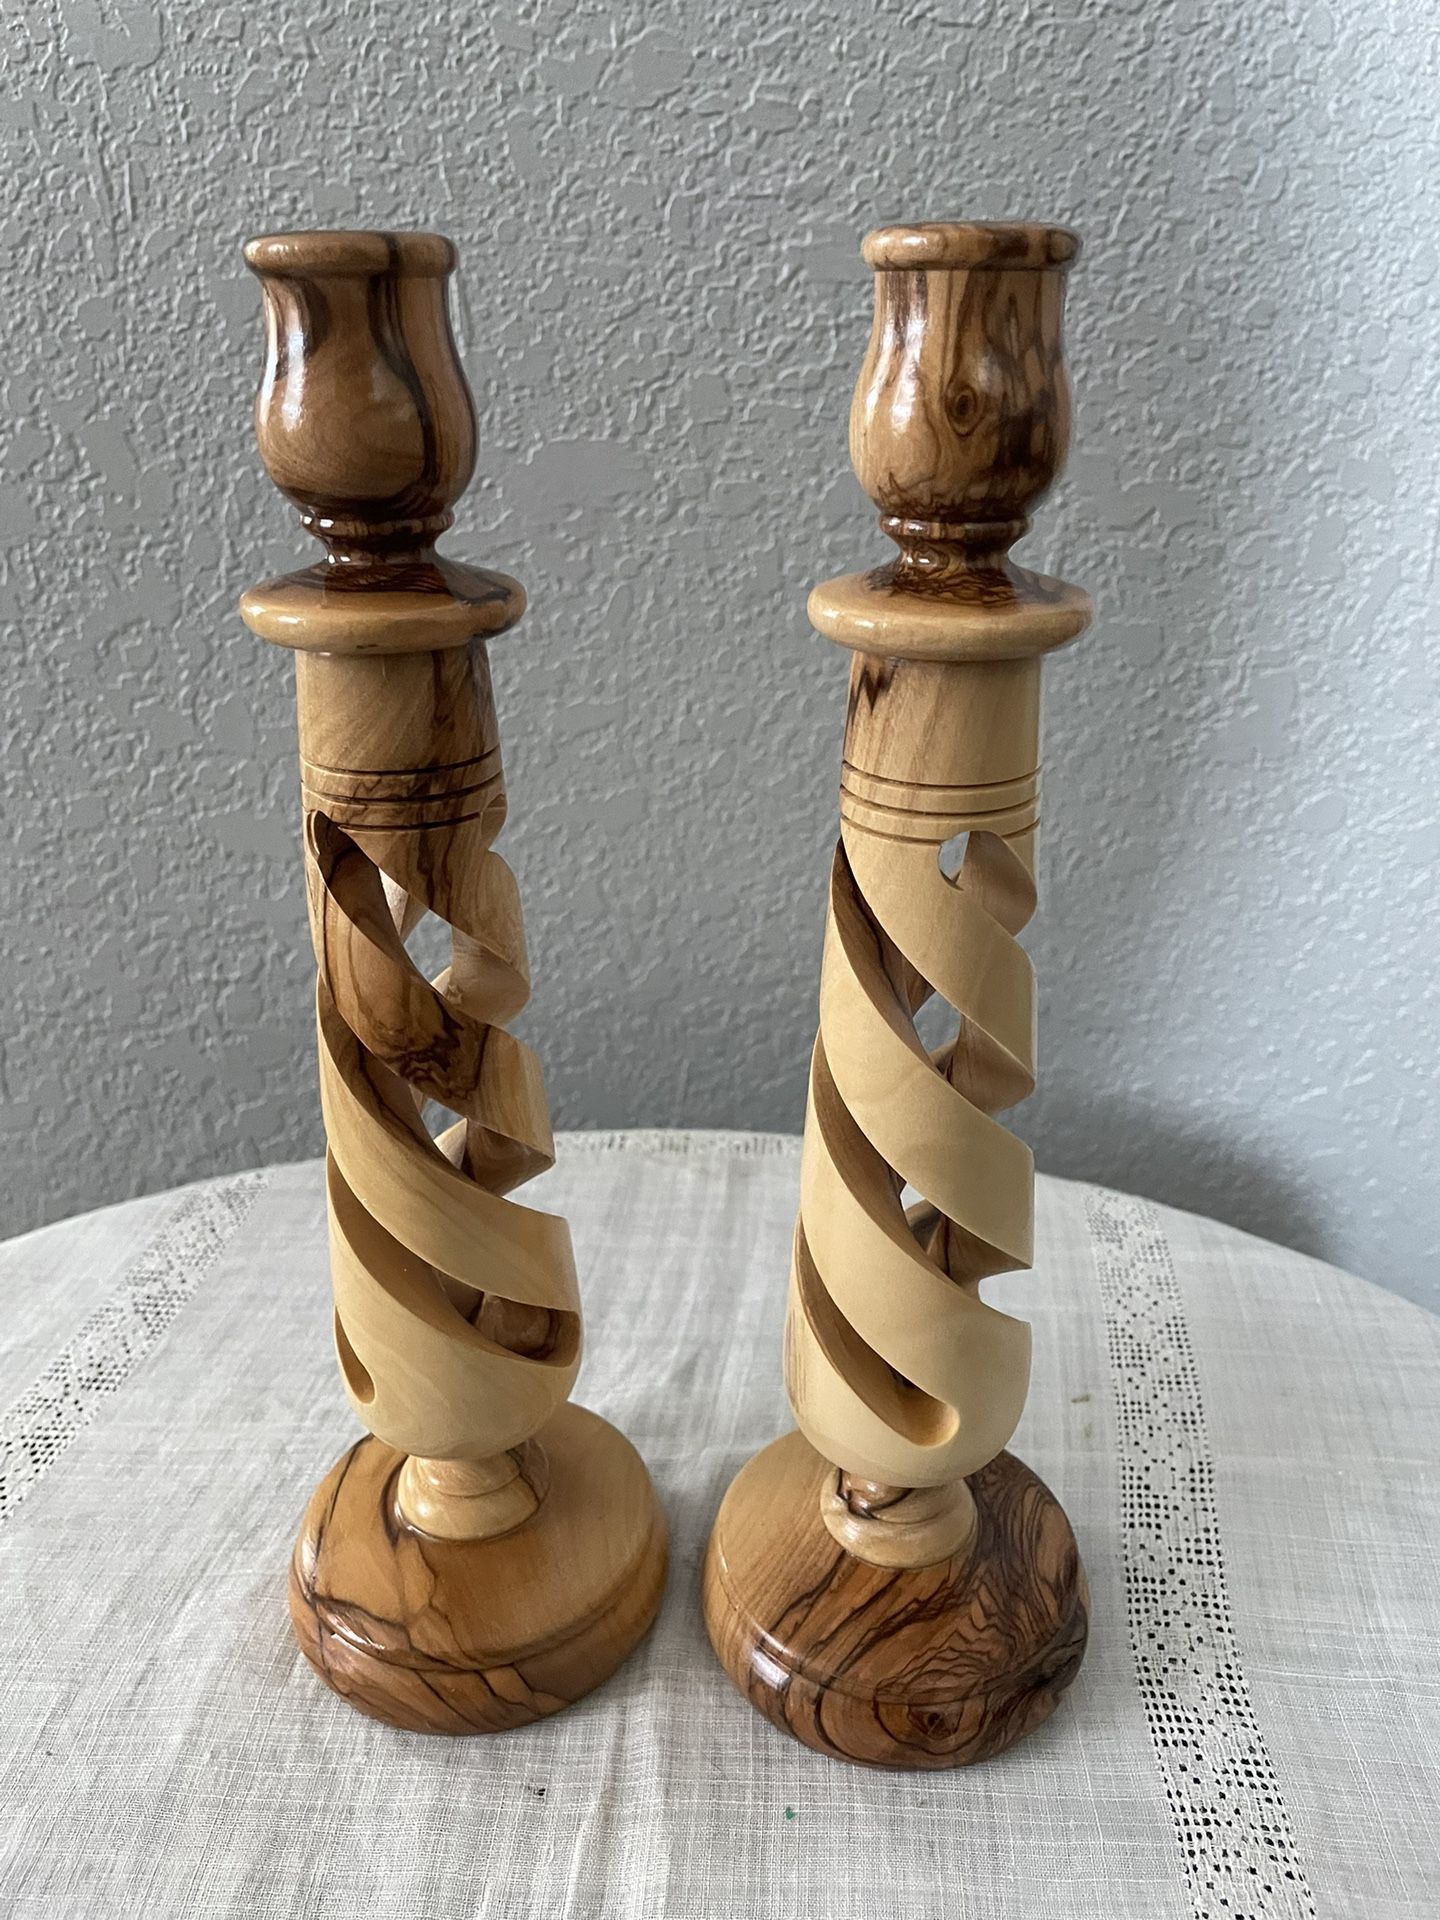 Pair of wooden candle holders 10”